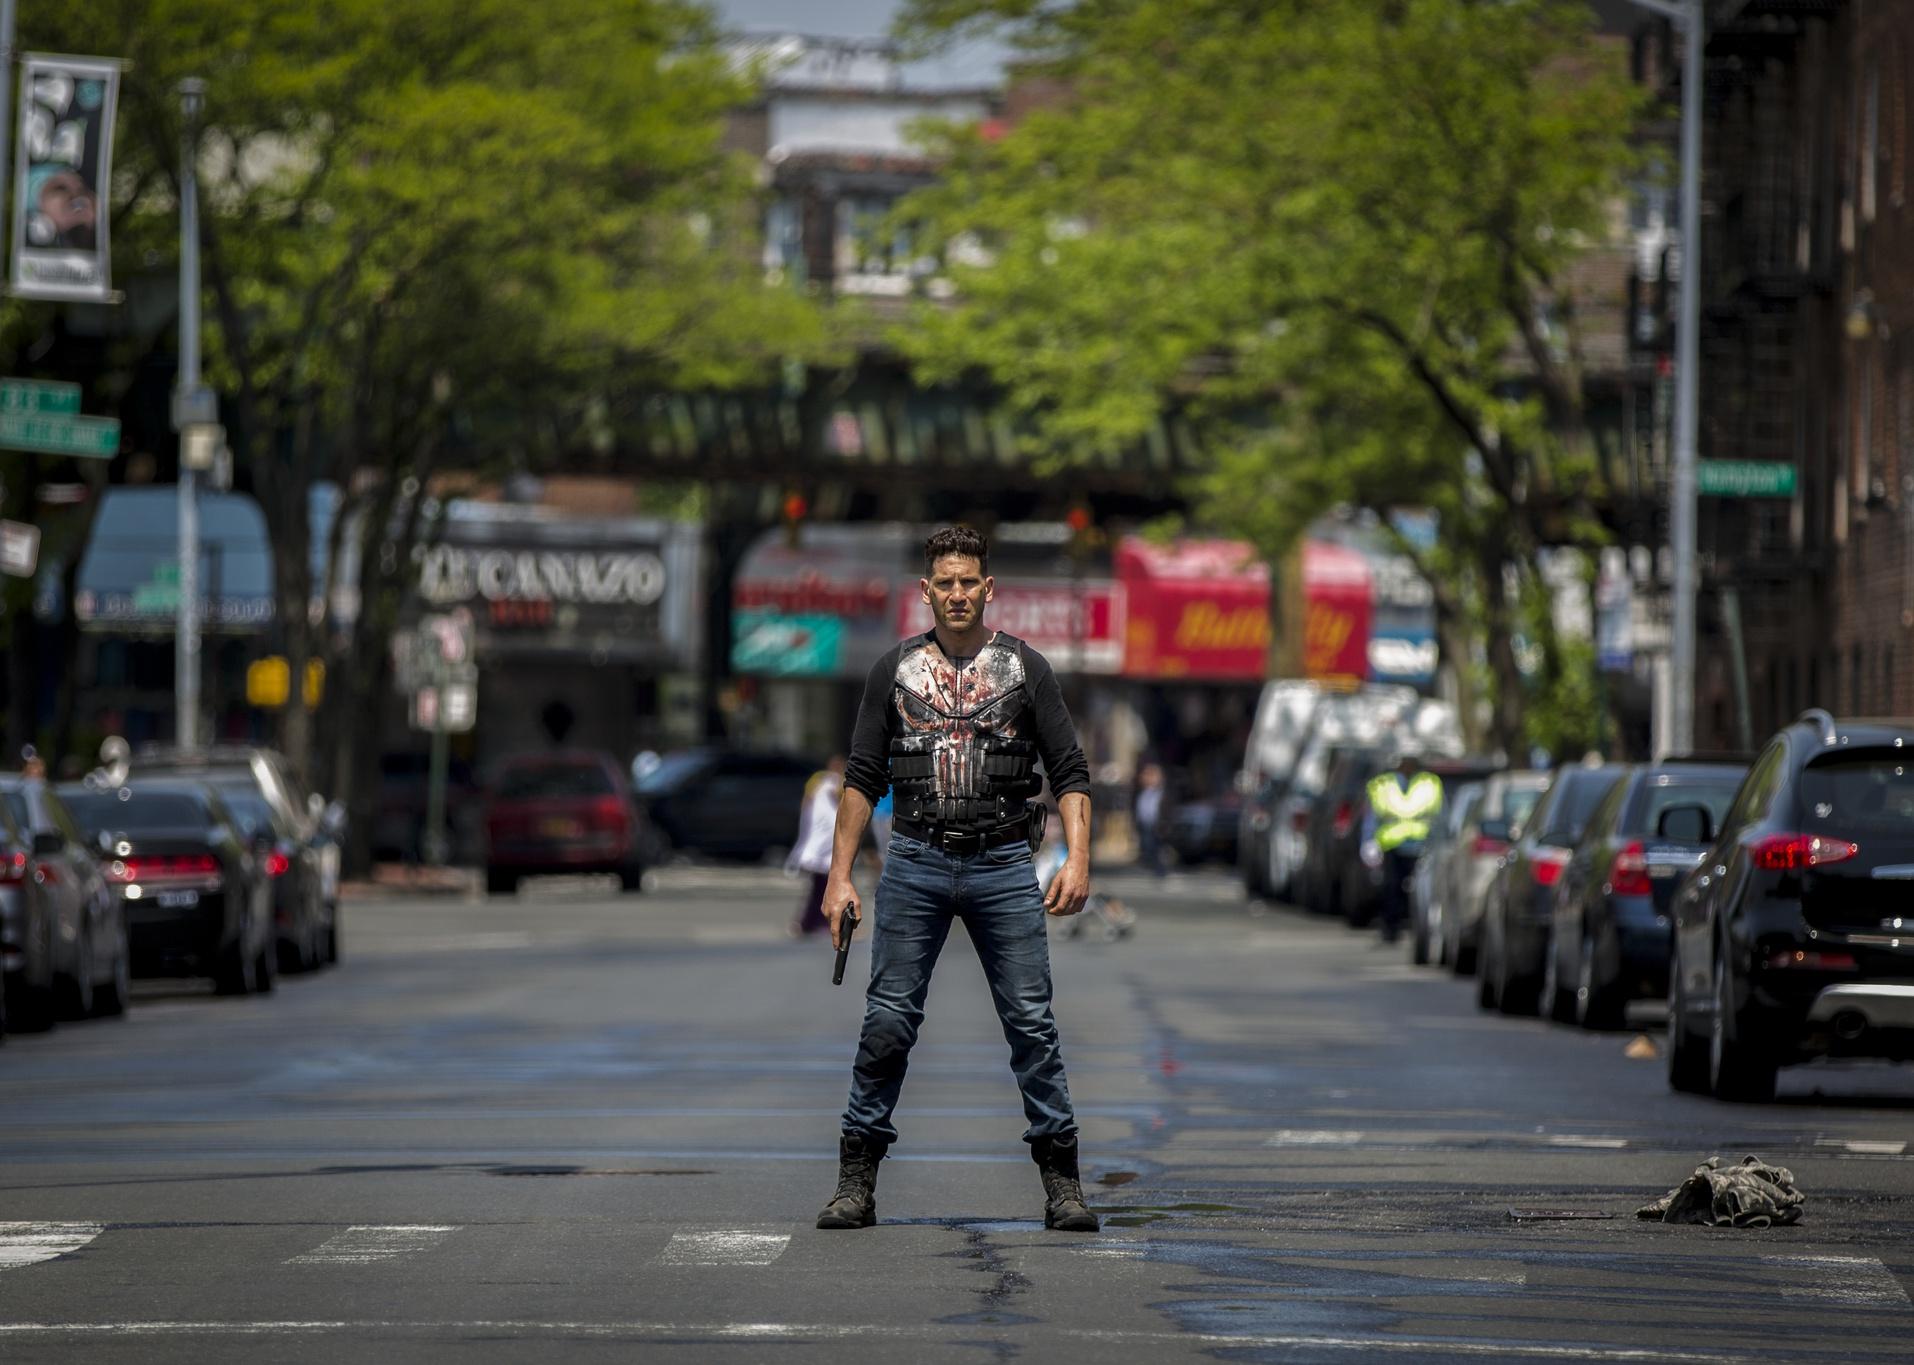 Jon Bernthal standing in the middle of the street with a gun.